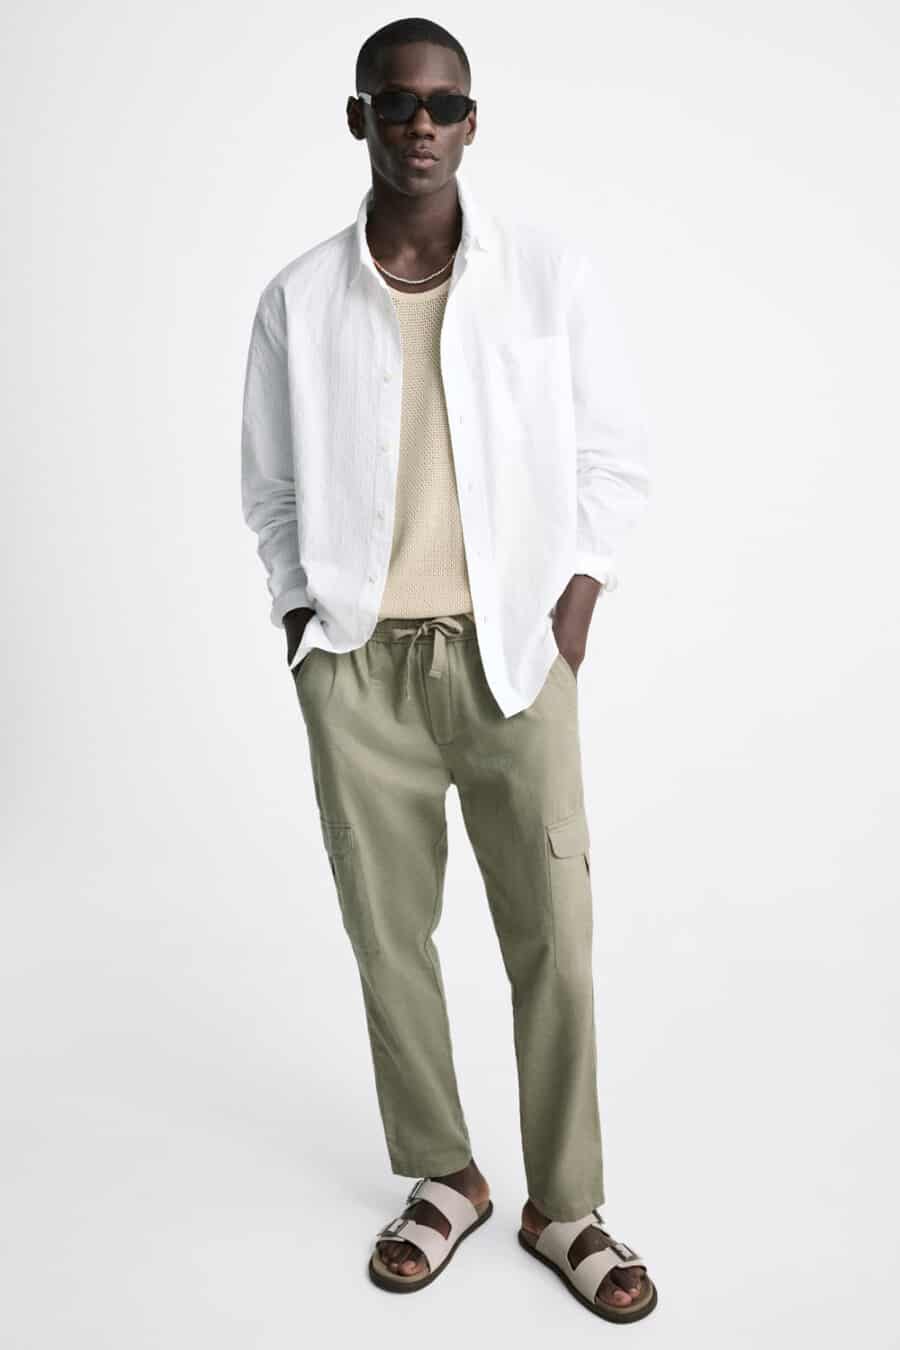 Men's green cargo pants, knit cream T-shirt, open white shirt and stone sandals outfit